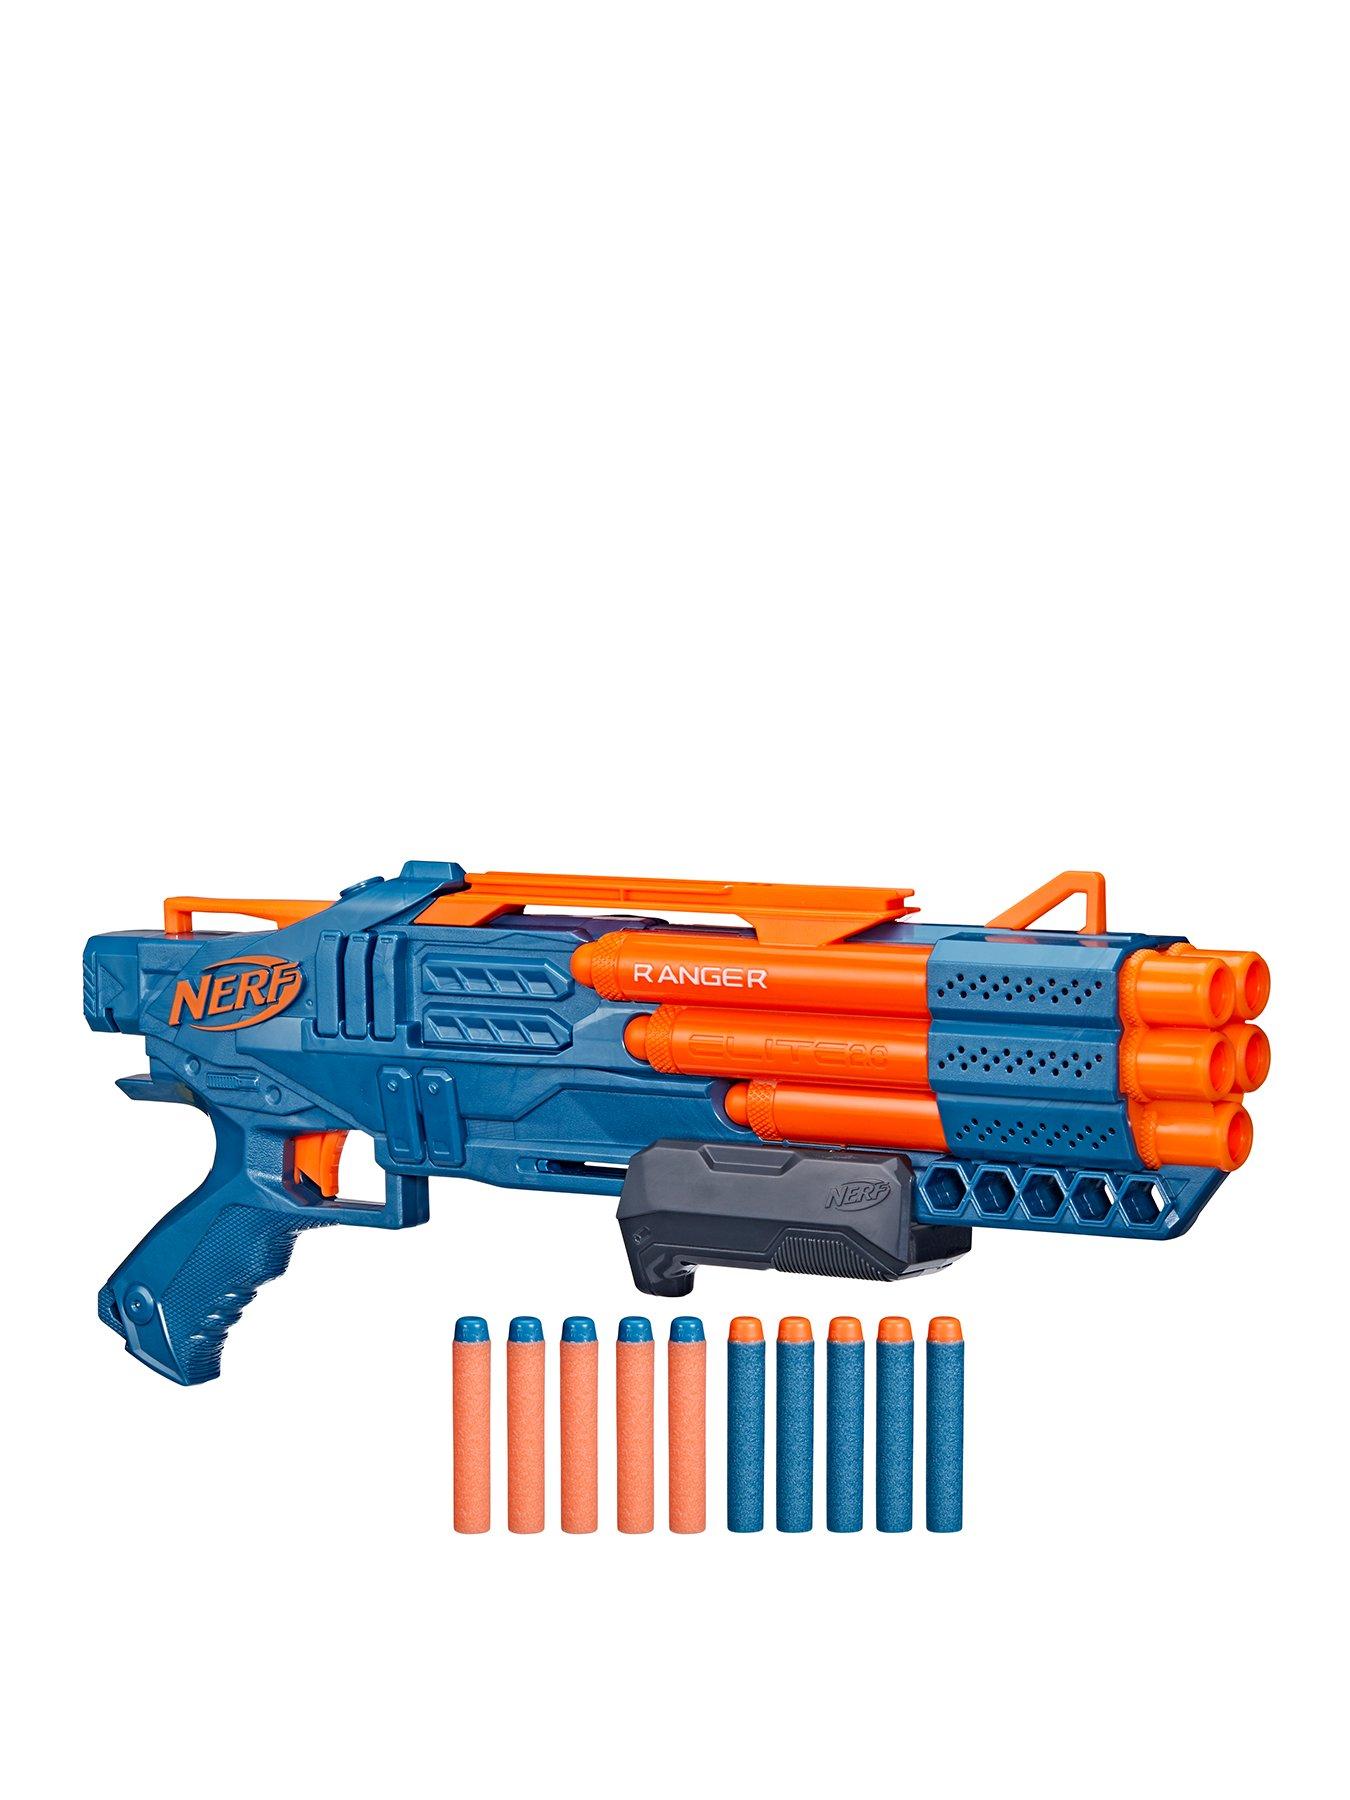  Hover Shot Shooting Toy for Kids - Ball Target Game for Nerf  Gun - Cool Birthday Gifts Toys for Boys Age 6+ Year Old Boy Best Teenage  Gift Idea - Gun